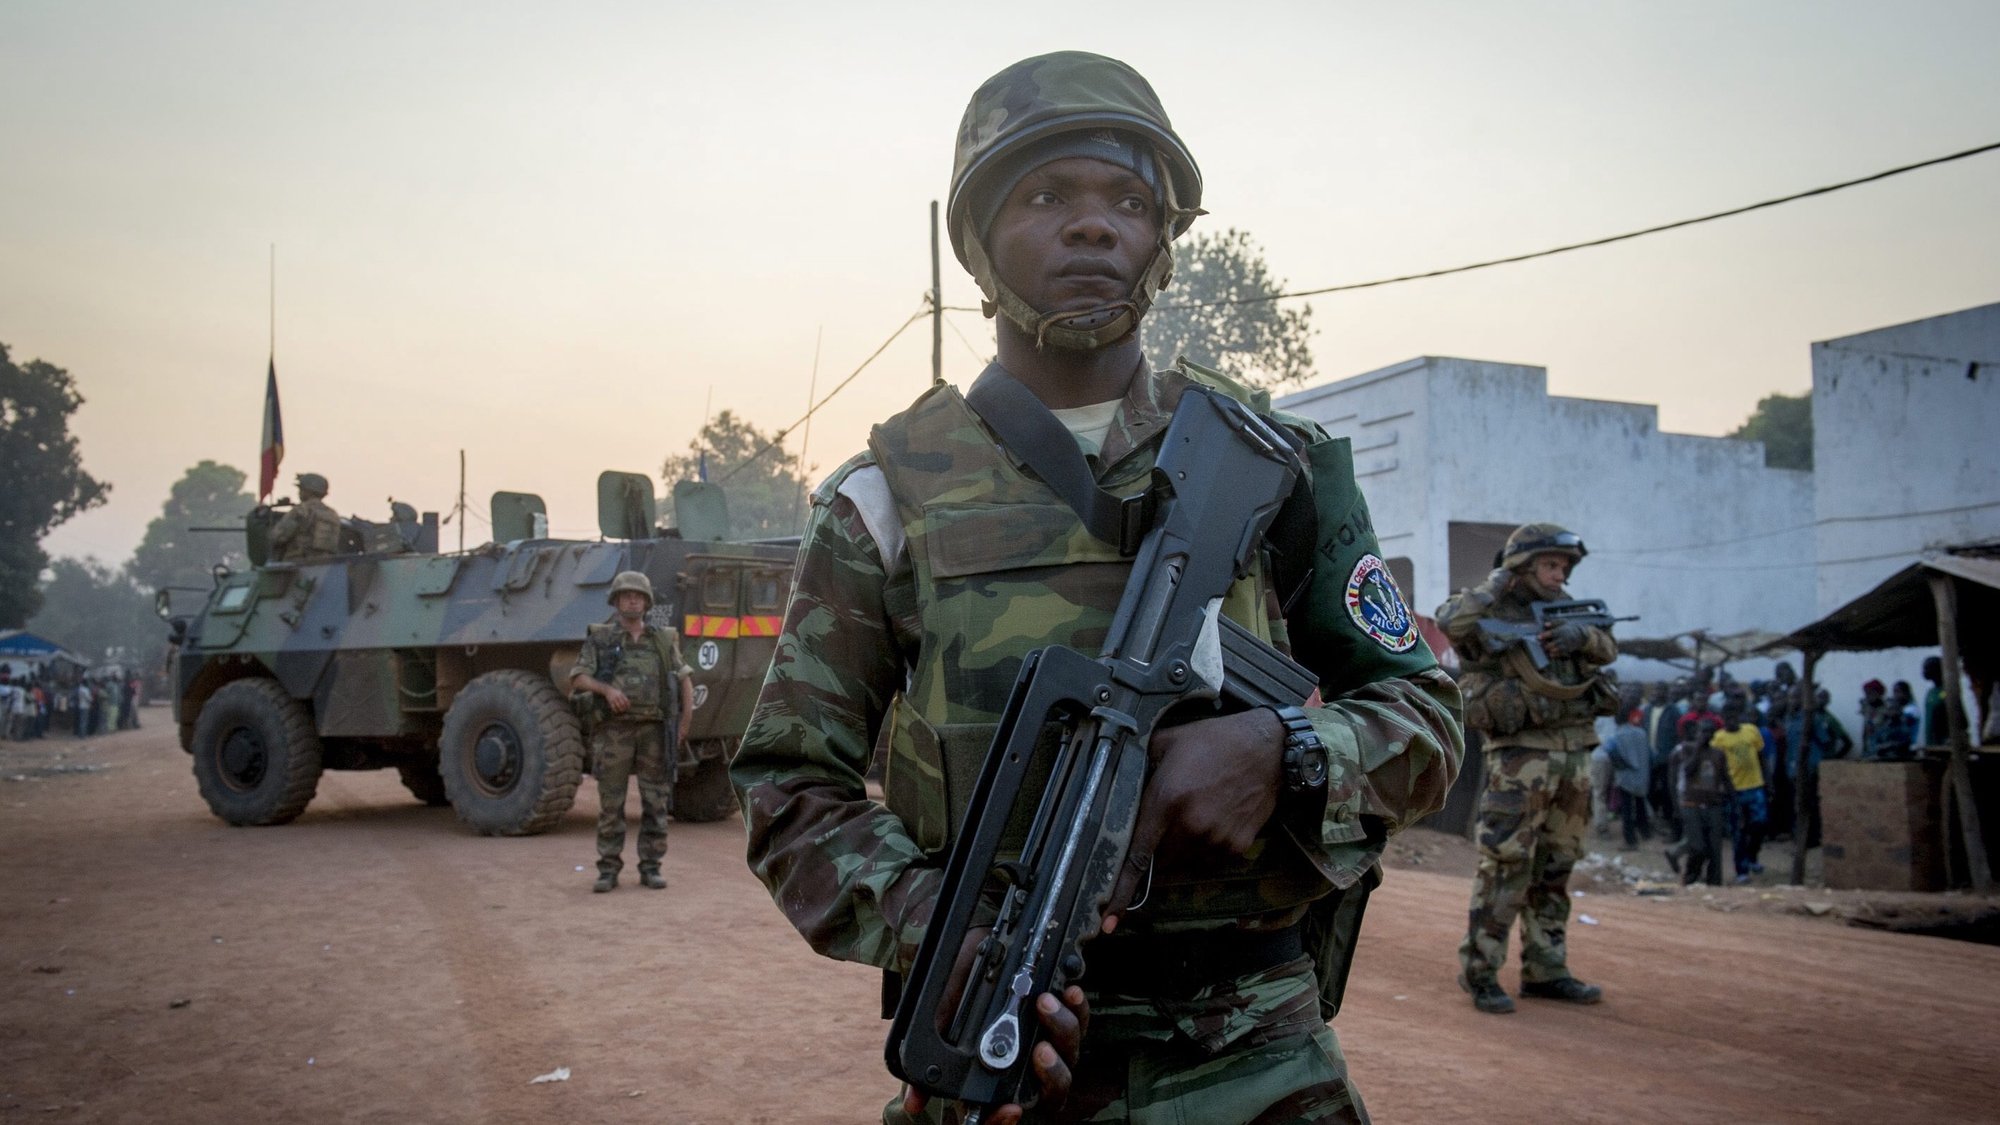 epa04002671 A picture made available by the French Army Communications Audiovisual office (ECPAD) on 28 December 2013 shows French soldiers of the MISCA unit patrolling the streets of Paoua, Central African Republic on 27 December 2013. French troops are engaged in Operation Sangaris in Central African Republic to stem the growing sectarian violence and chaos since rebel leader Michel Djotodia ousted president Francois Bozize earlier this year.  EPA/EMA / ECPAD / HANDOUT  HANDOUT EDITORIAL USE ONLY